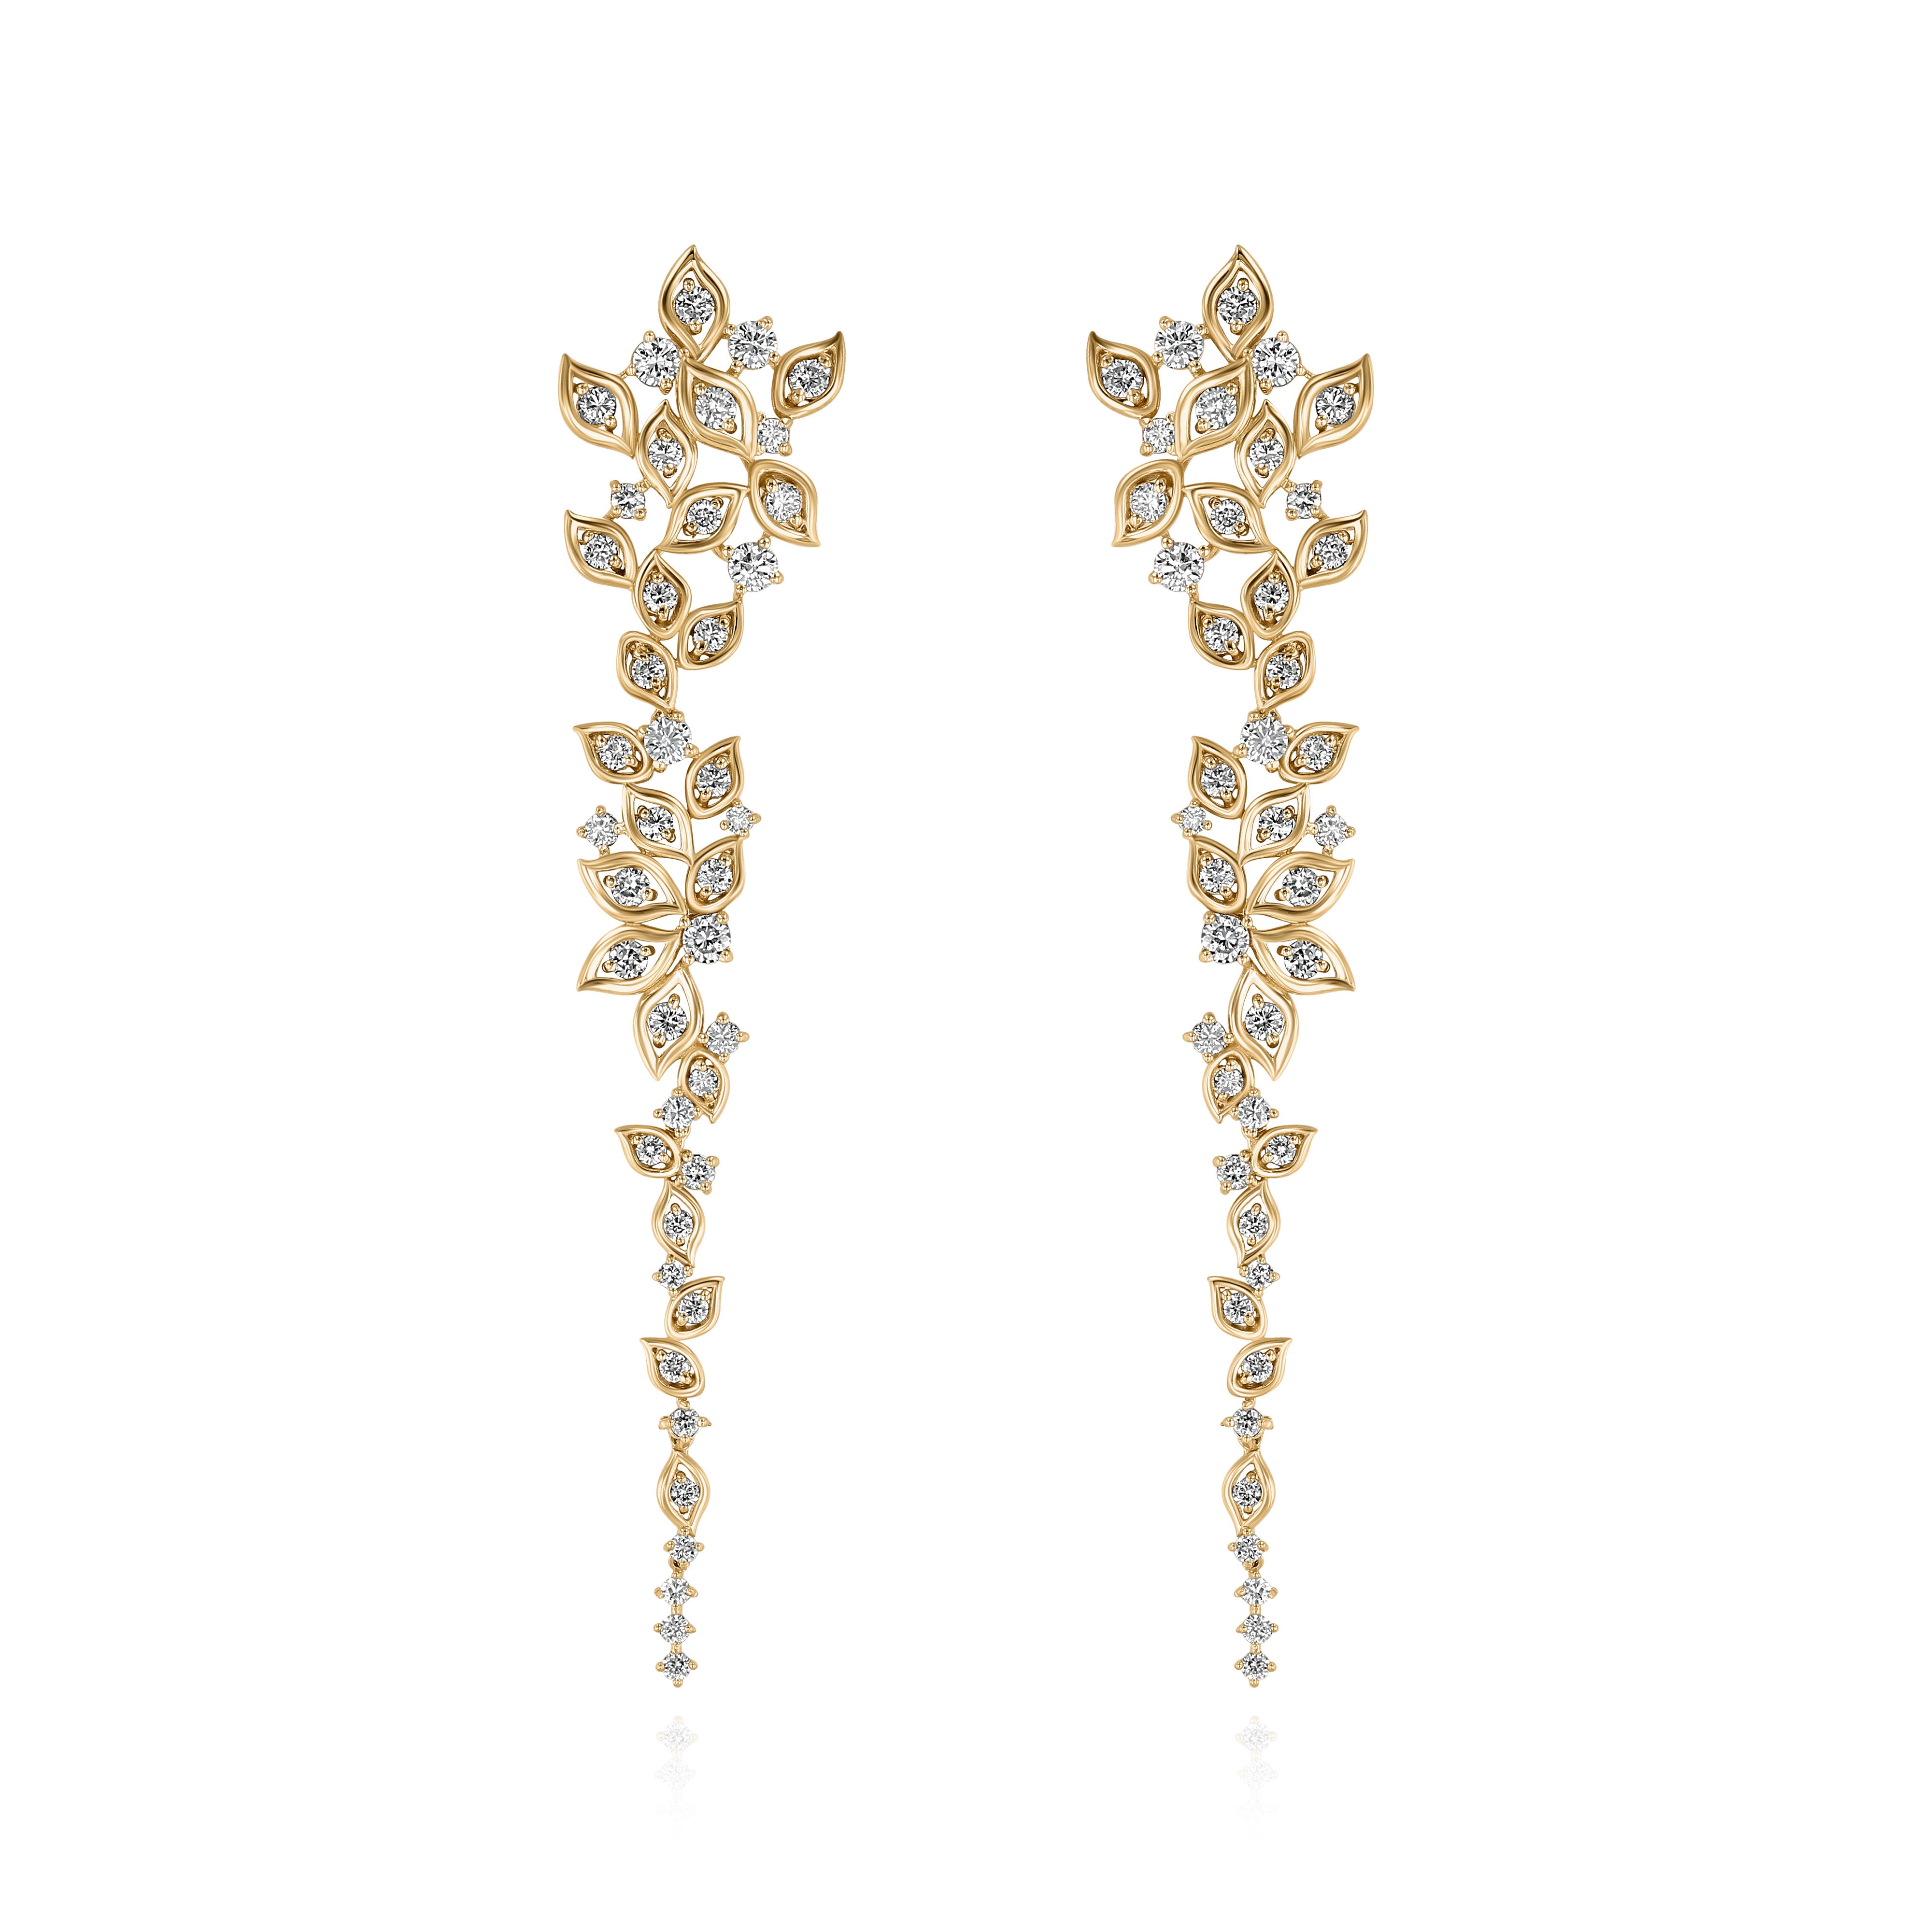 Earrings with Yellow Gold petals and round Diamonds inside them, Large